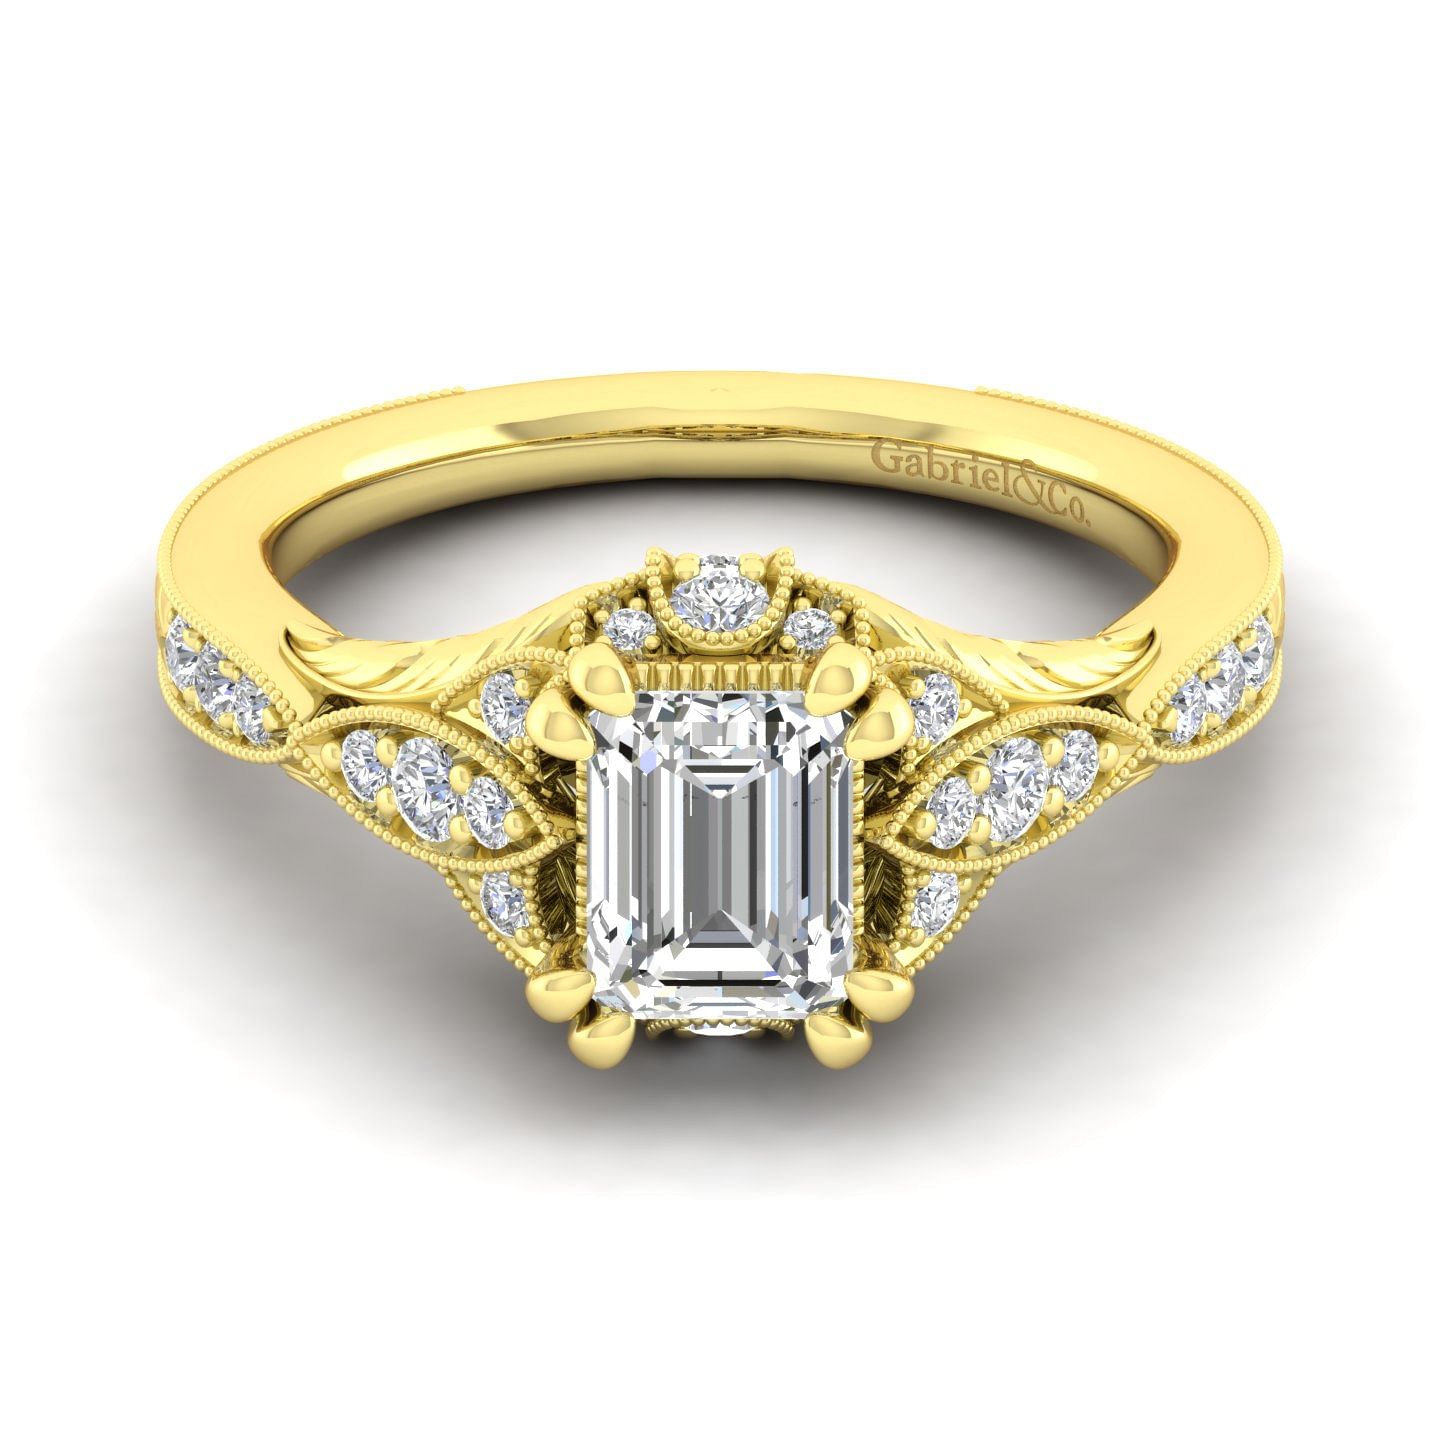 Unique 14K Yellow Gold Vintage Inspired Emerald Cut Diamond Halo Engagement Ring